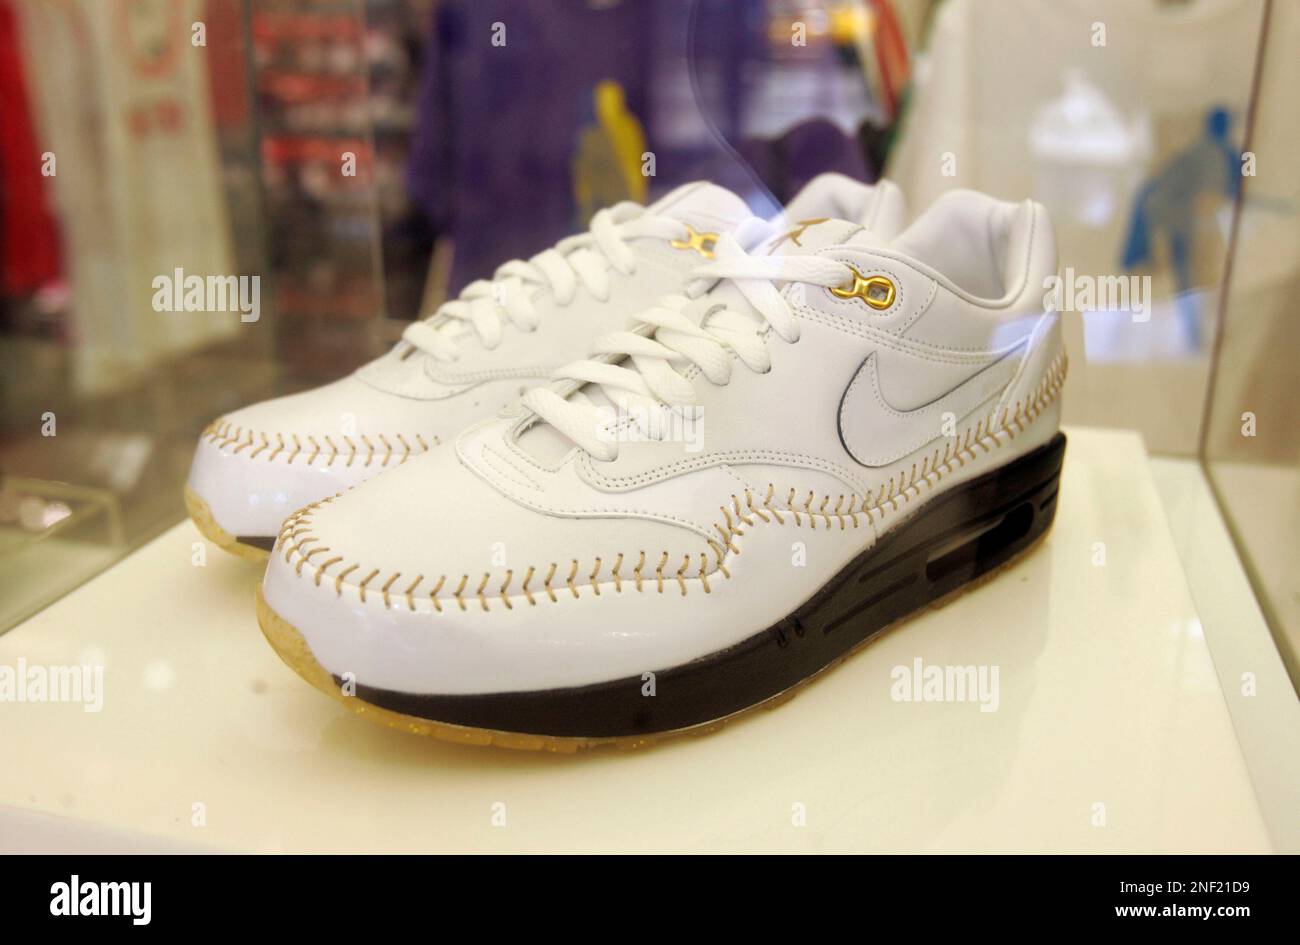 Nike's baseball inspired Air Max 1 Premium-Wang shoes are seen on display  during its debut release in Taipei, Taiwan, Friday, July 10, 2009. The  shoe, designed with Taiwanese Yankee baseball pitcher Wang